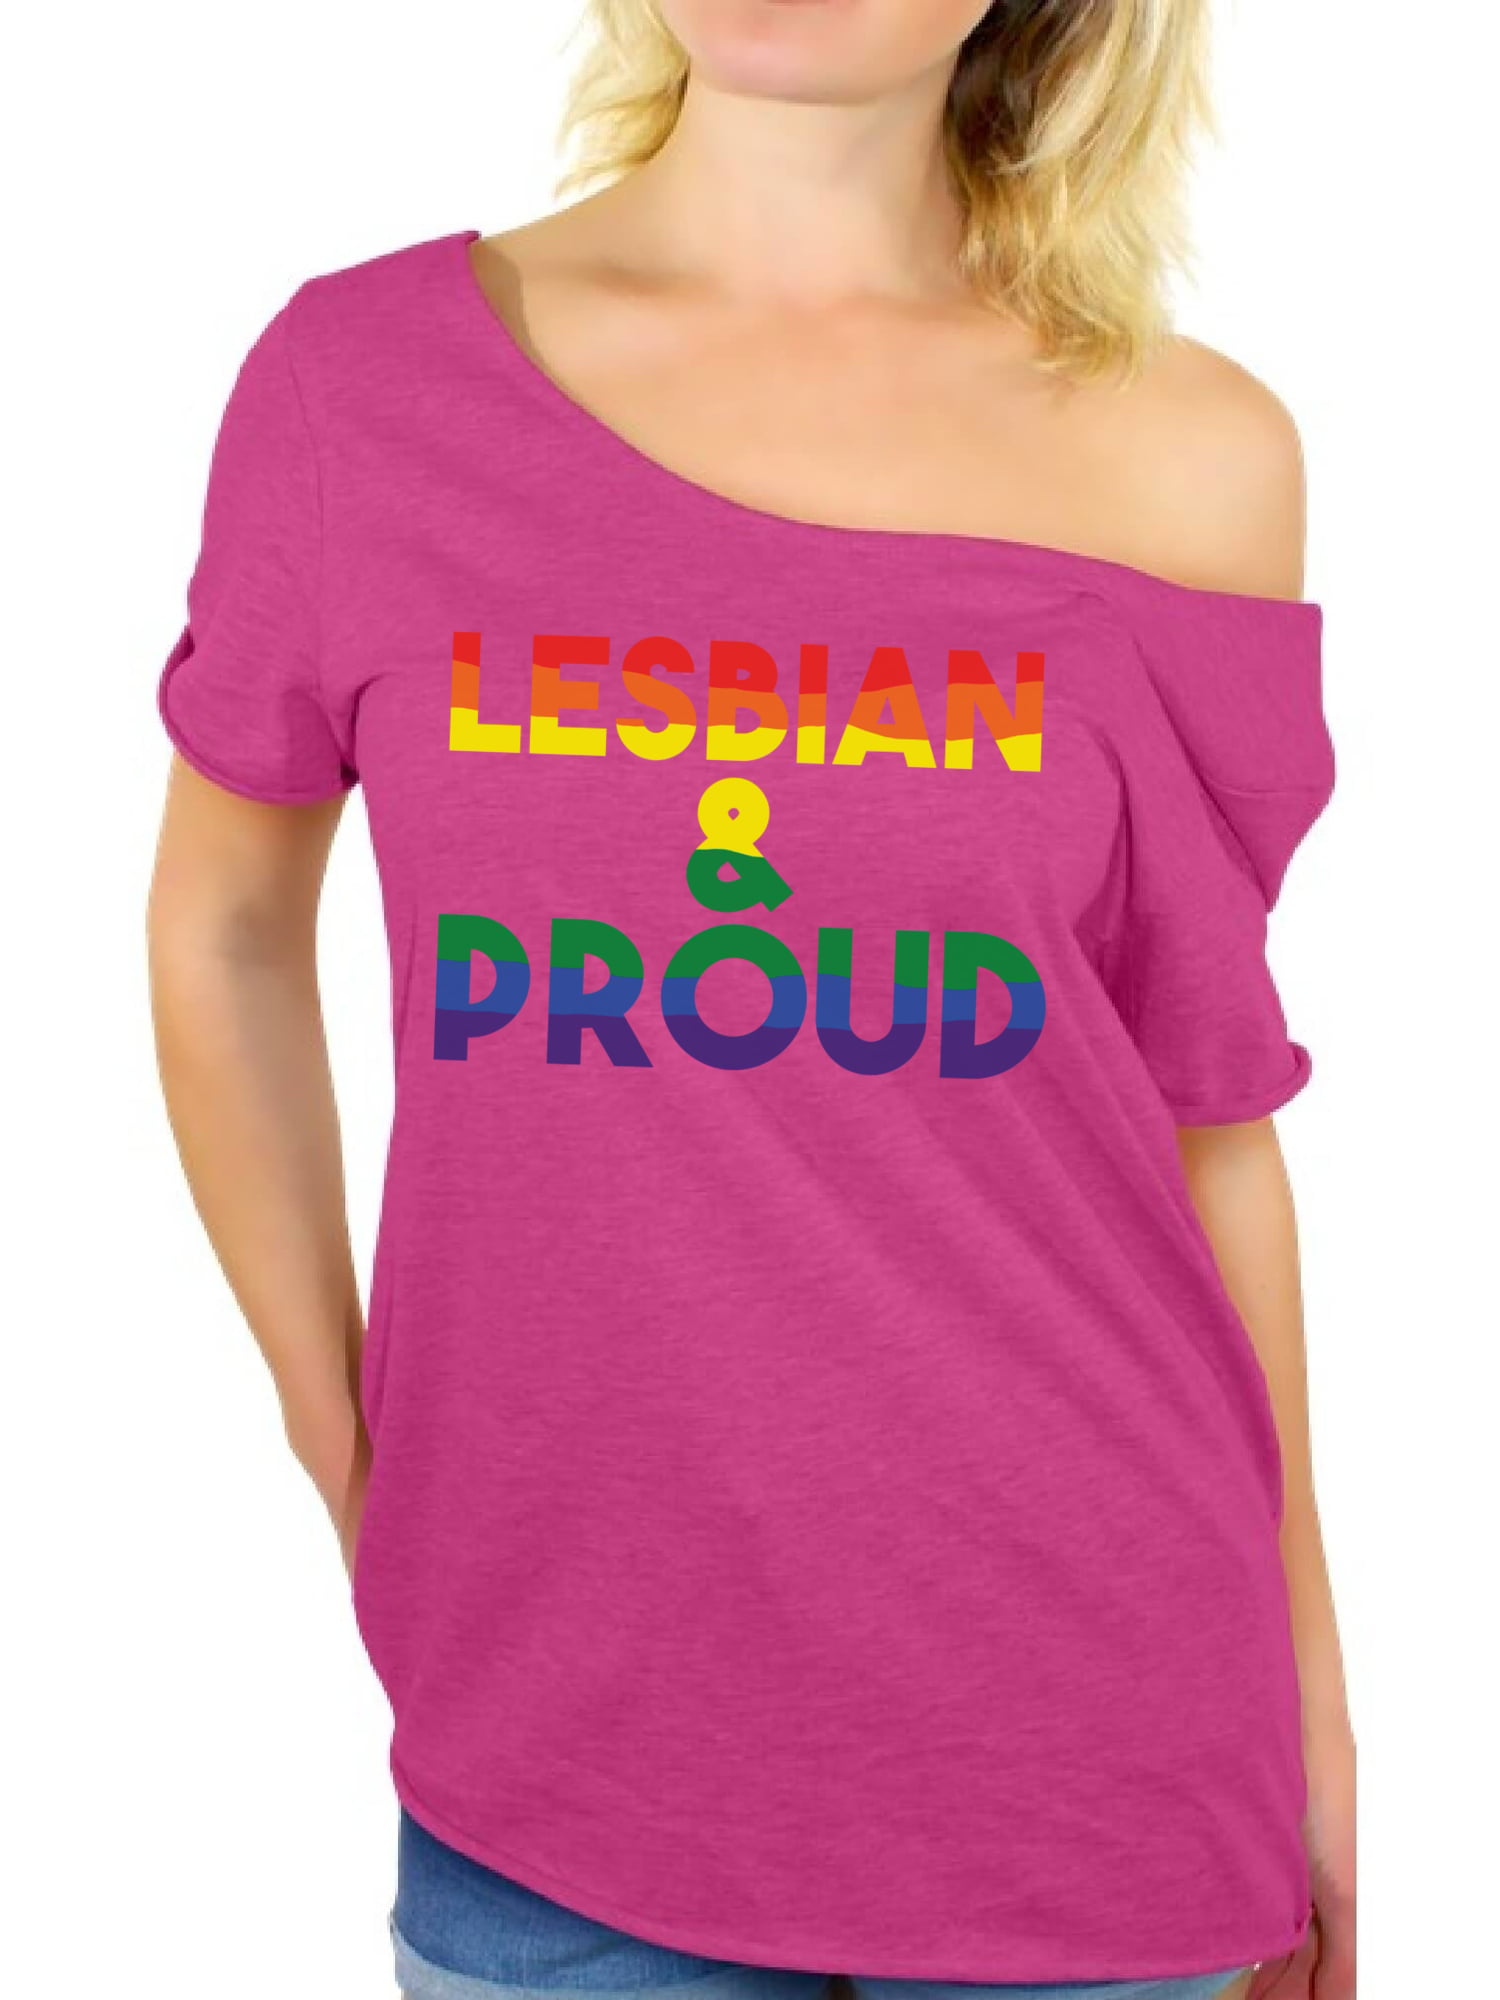 Awkward Styles Lesbian And Proud T Shirt Lgbtq Off Shoulder Tops For Women 